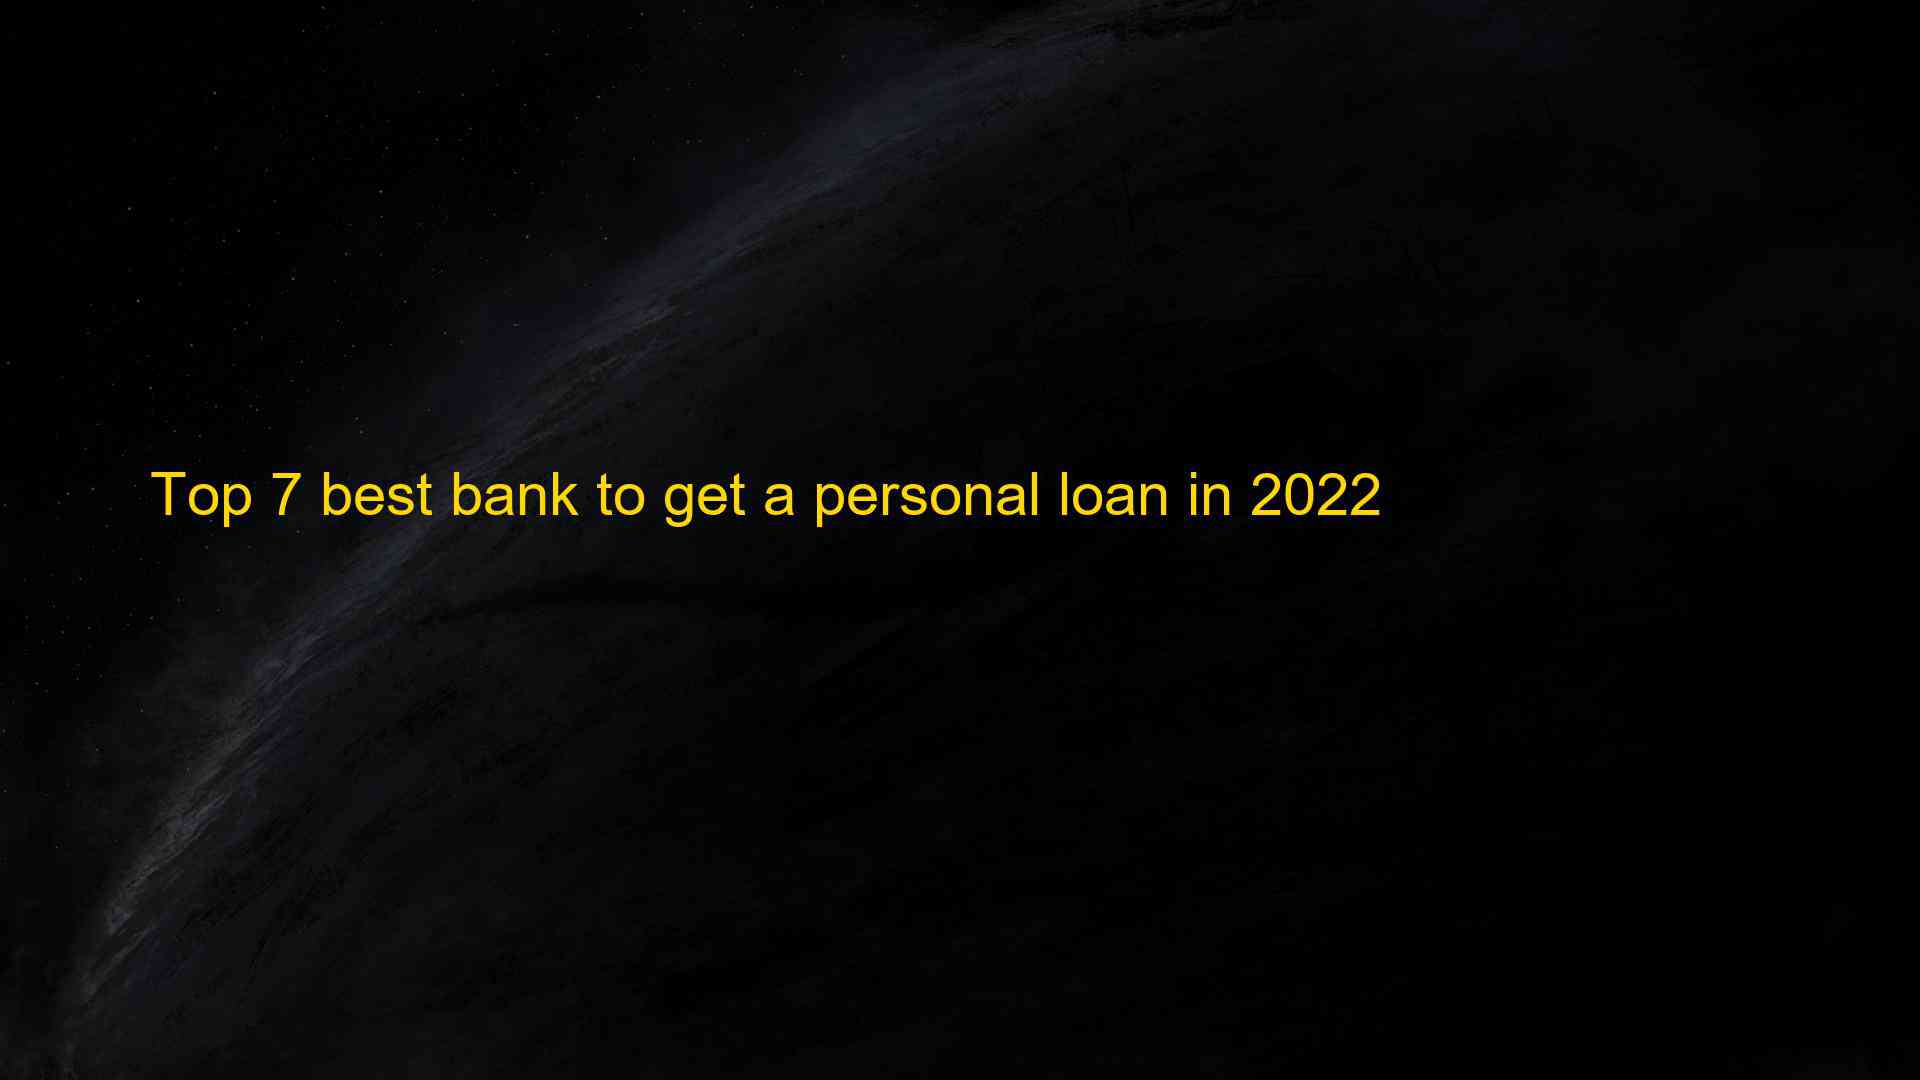 Top 7 best bank to get a personal loan in 2022 1659593732